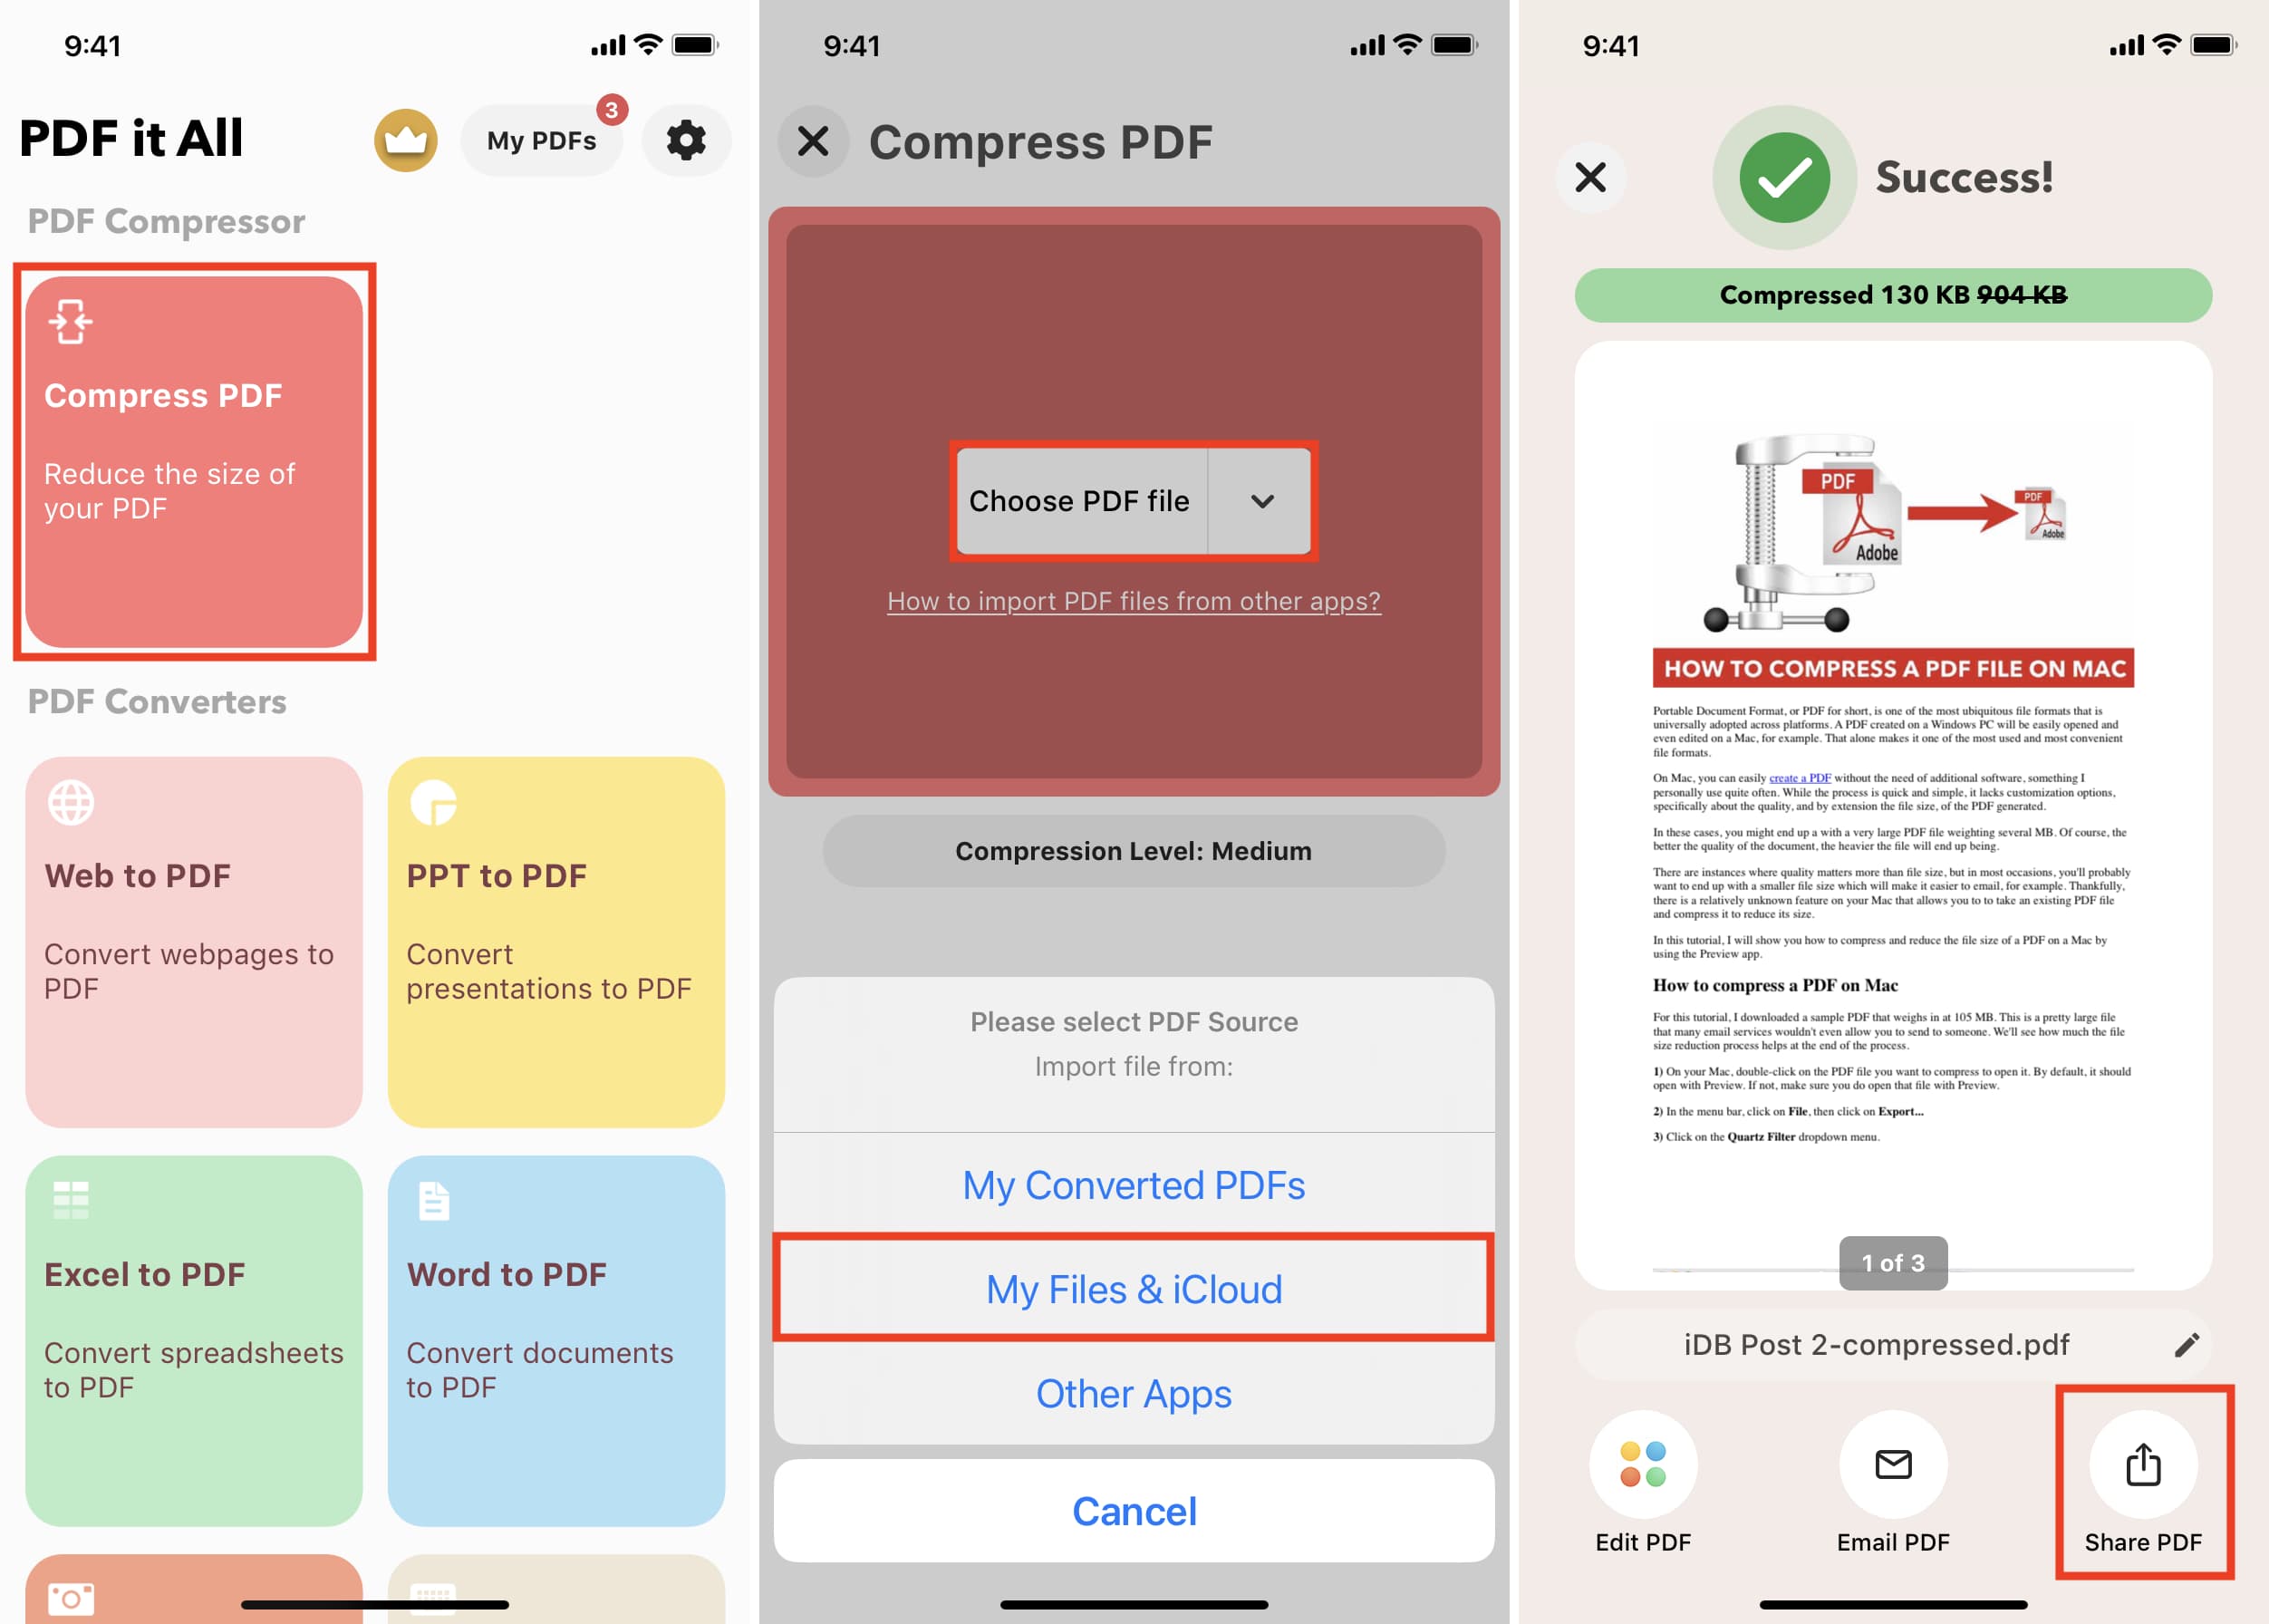 PDF it All app on iPhone to compress PDFs